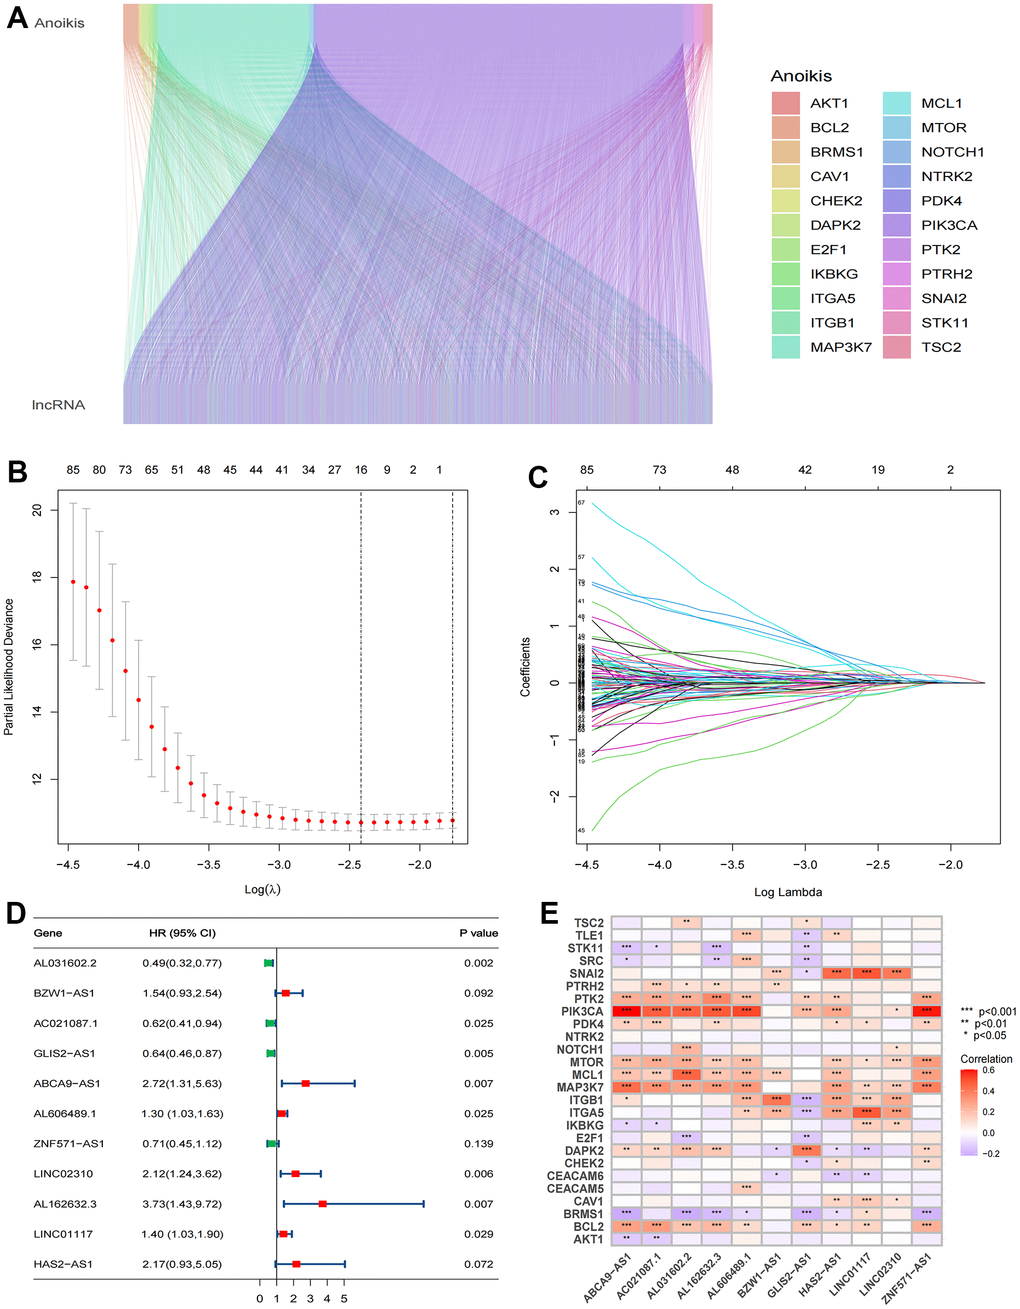 Identification of significant prognosis ARlncRNAs. (A) Sankey diagram depicting the relationships between 27 anoikis-related genes and ARlncRNAs co-expression. (B) LASSO Cox regression analysis revealed 85 ARlncRNAs based LASSO cross validation plot. (C) LASSO coefficient of 85 ARlncRNAs. (D) Forest plot showed different ARlncRNAs for high and low risk, with red representing high-risk lncRNAs and green representing low-risk ARlncRNAs. (E) Correlation heatmap showed the relationship between 11 ARlncRNAs and anoikis-related genes for the signature. Red represents positive correlations and blue represents negative correlations.